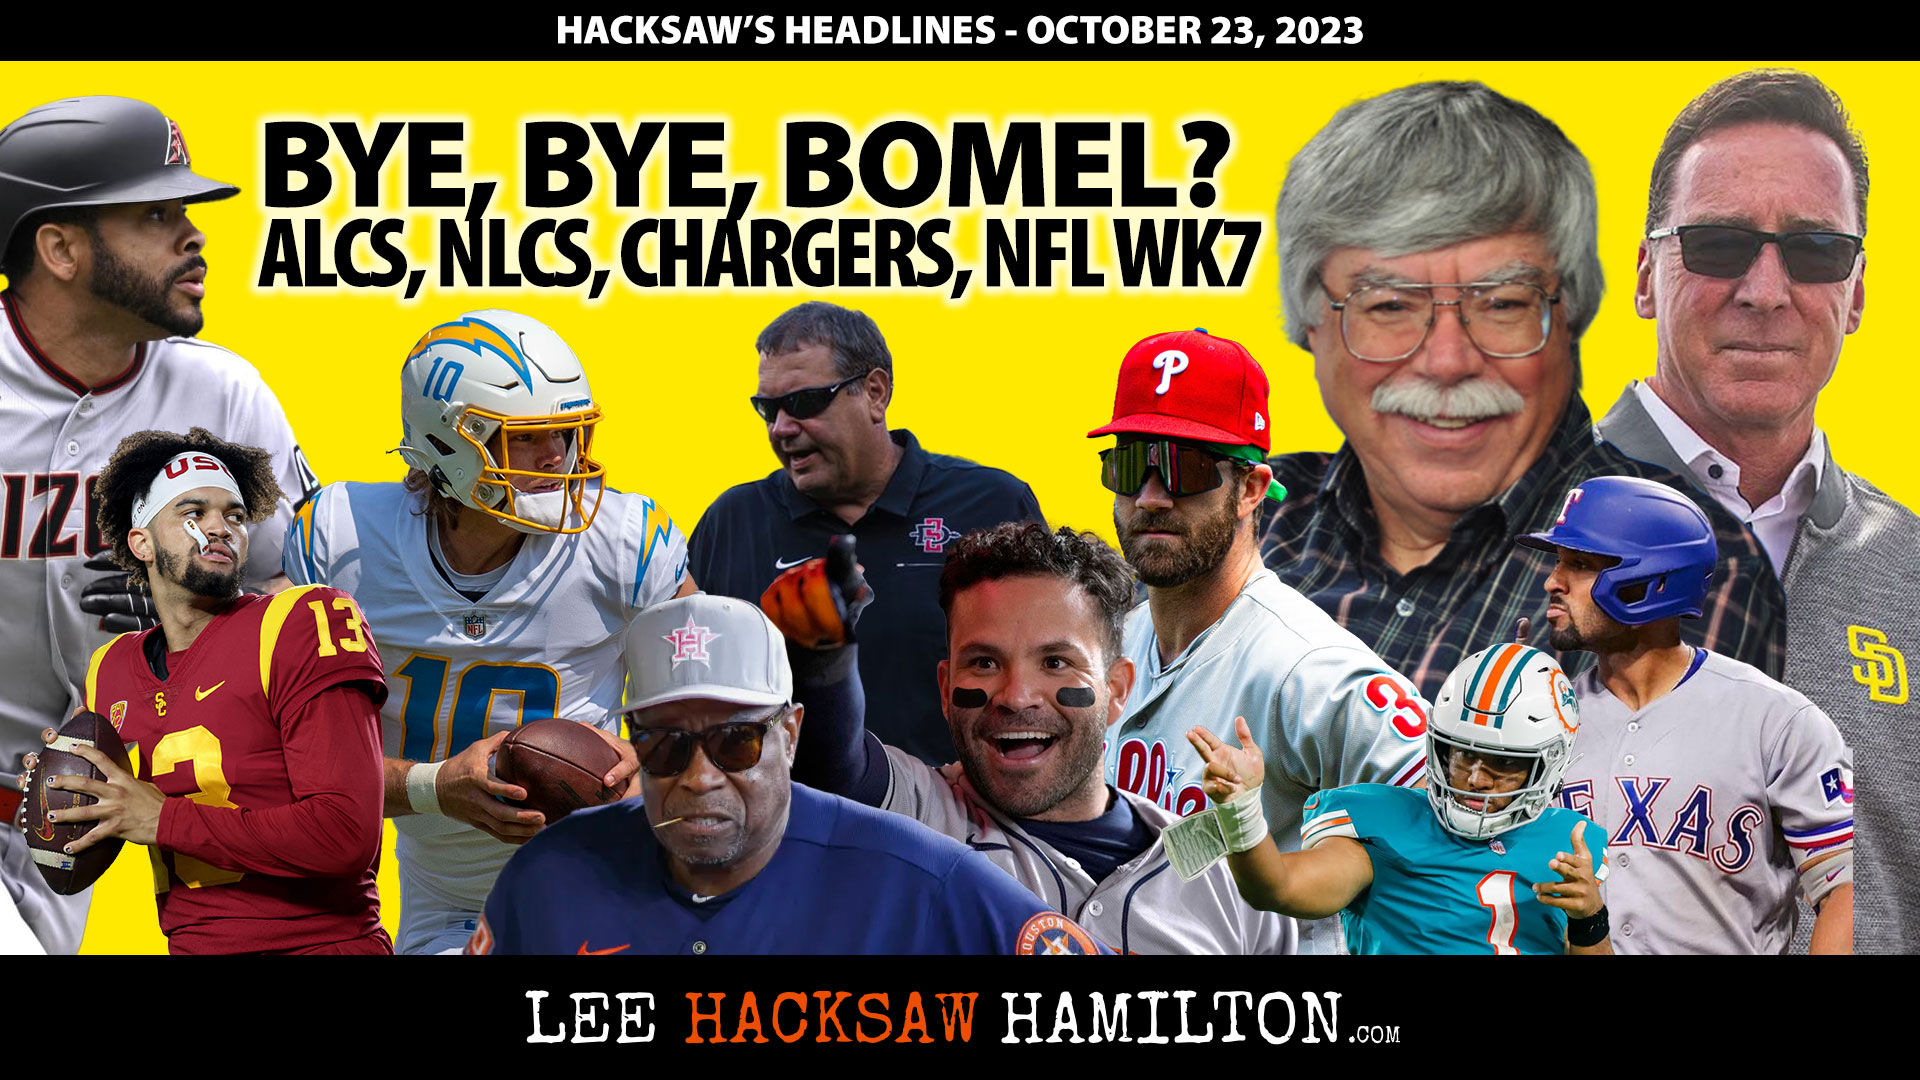 Lee Hacksaw Hamilton discusses Bob Melvin leaving Padres?, ALCS, NLCS, Chargers/Chiefs, NFL Weird Games, USC, UCLA, San Diego State